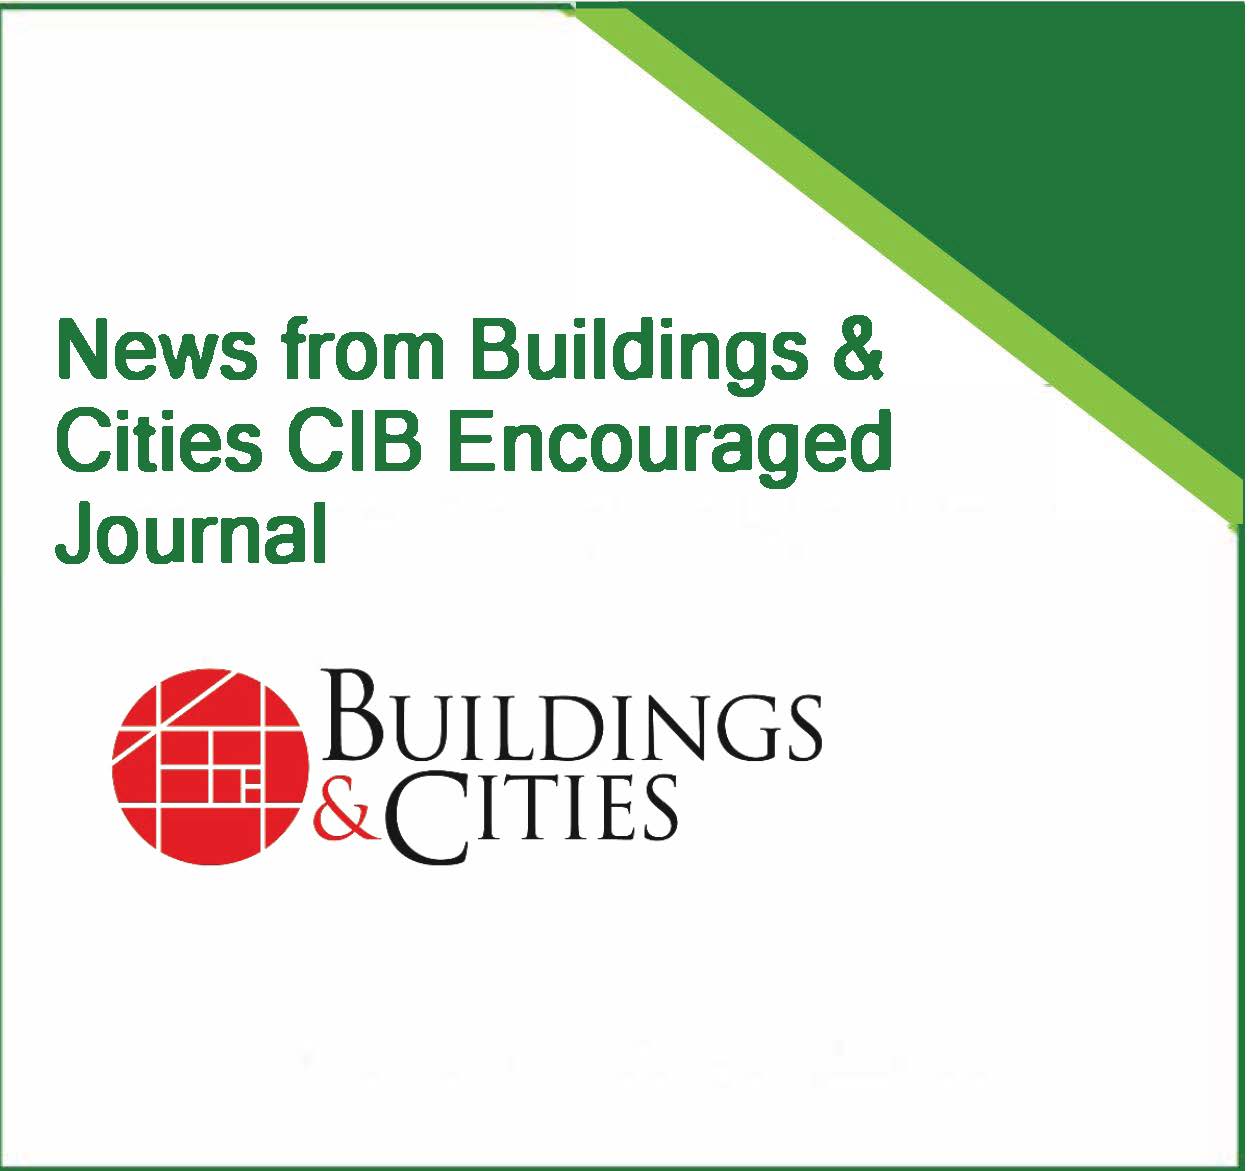 News from Buildings & Cities: November 2021